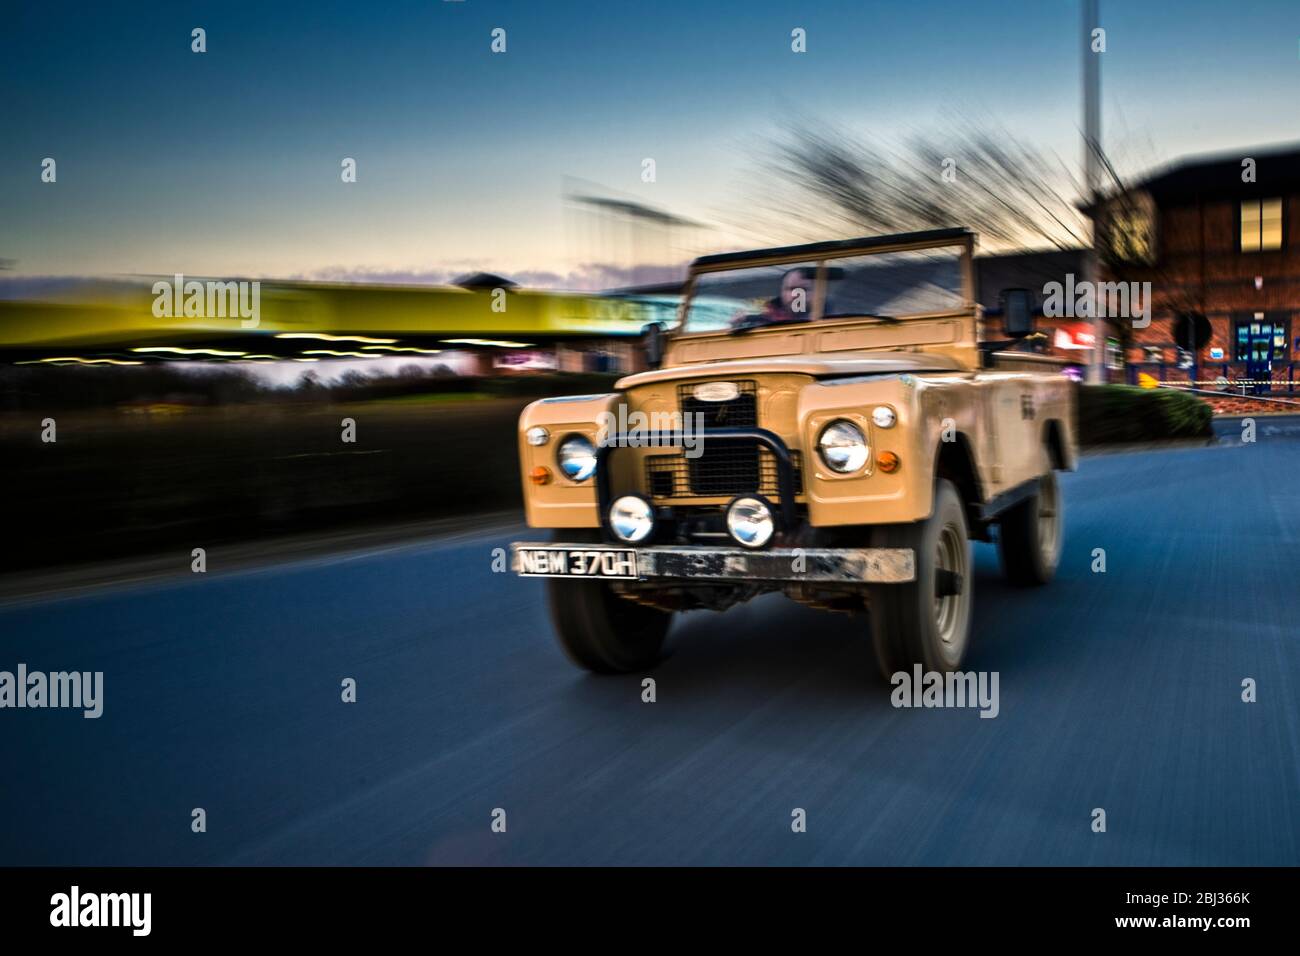 An old Series Land Rover drives away from a superstore. Stock Photo